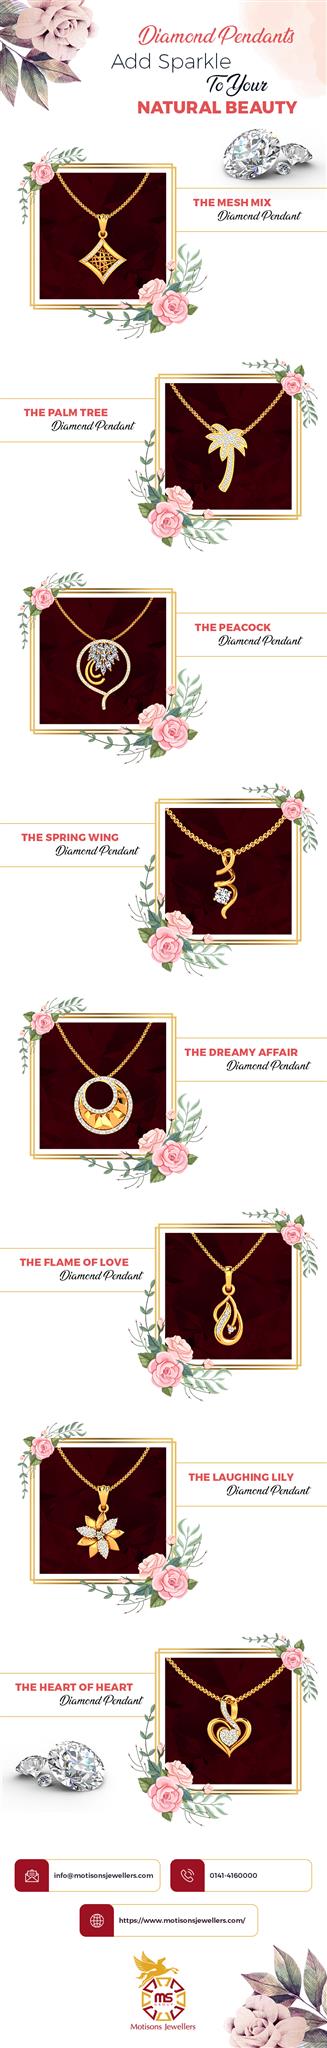 Diamond-Pendants-Add-Sparkle-to-Your-Natural-Beauty.jpg